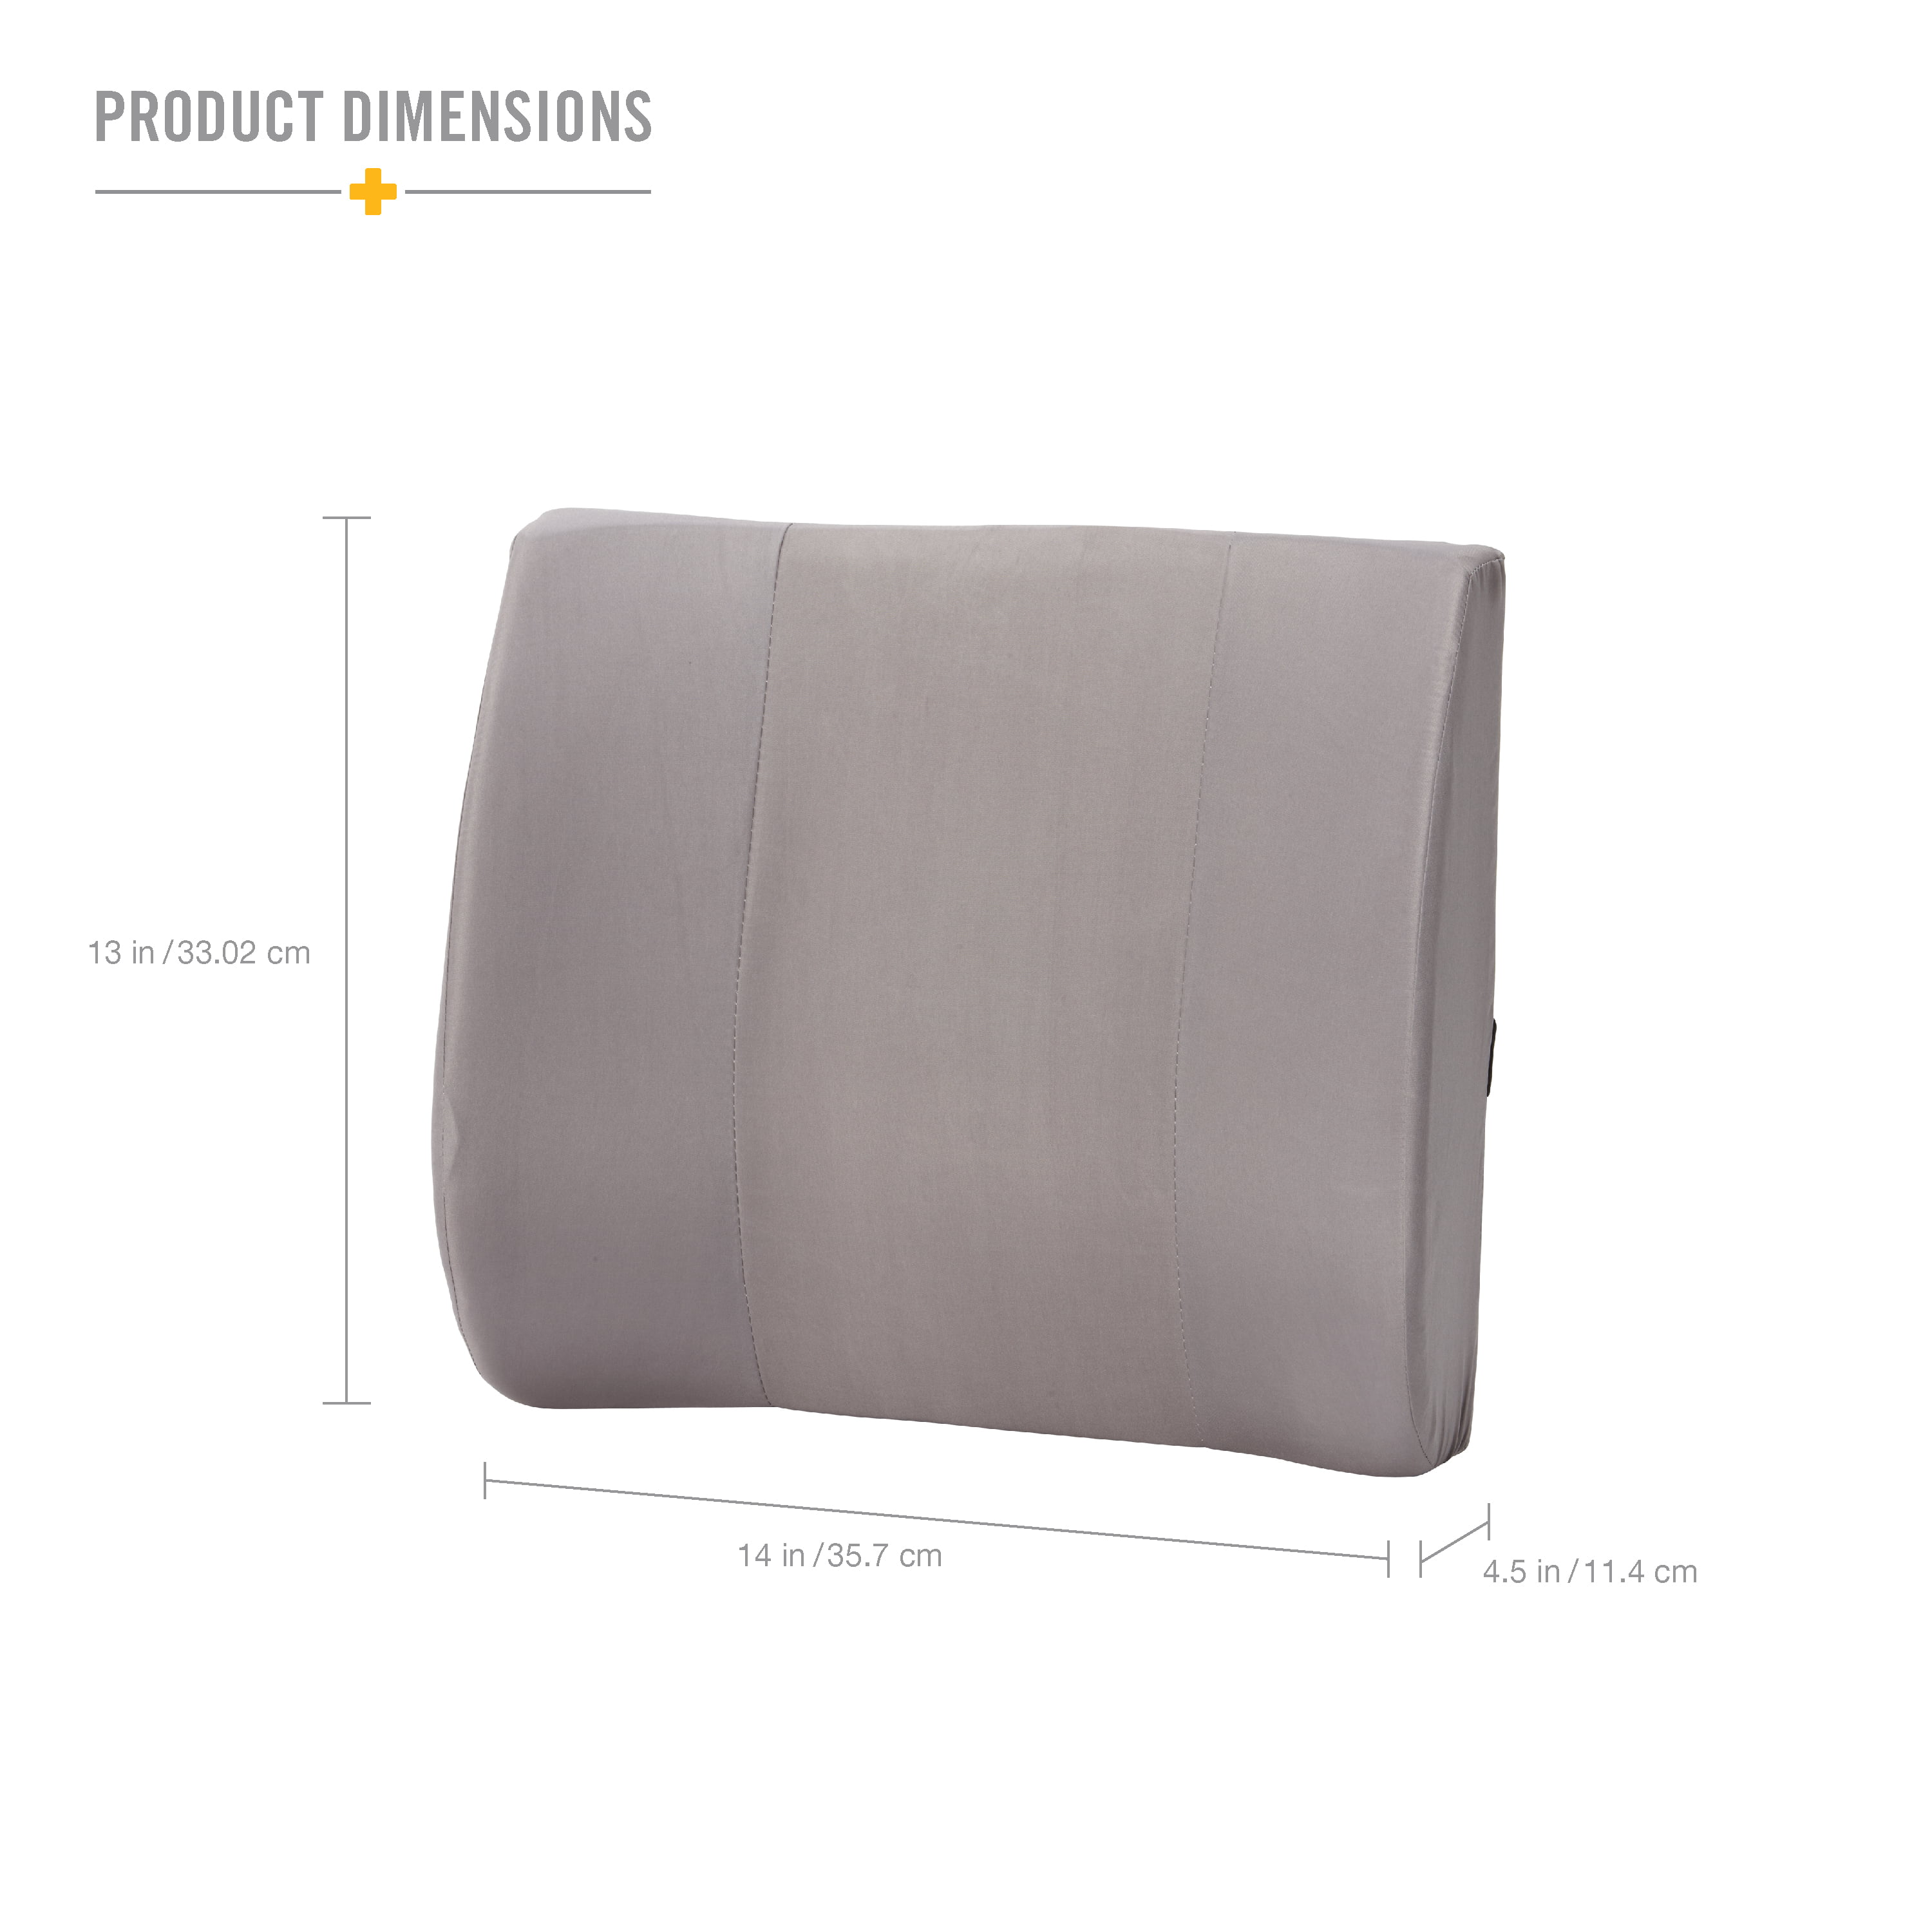 D-Contour Molded Pressure Relief Cushion with Elastic Cover by DDO –  Diversability Development Organization (DDO)